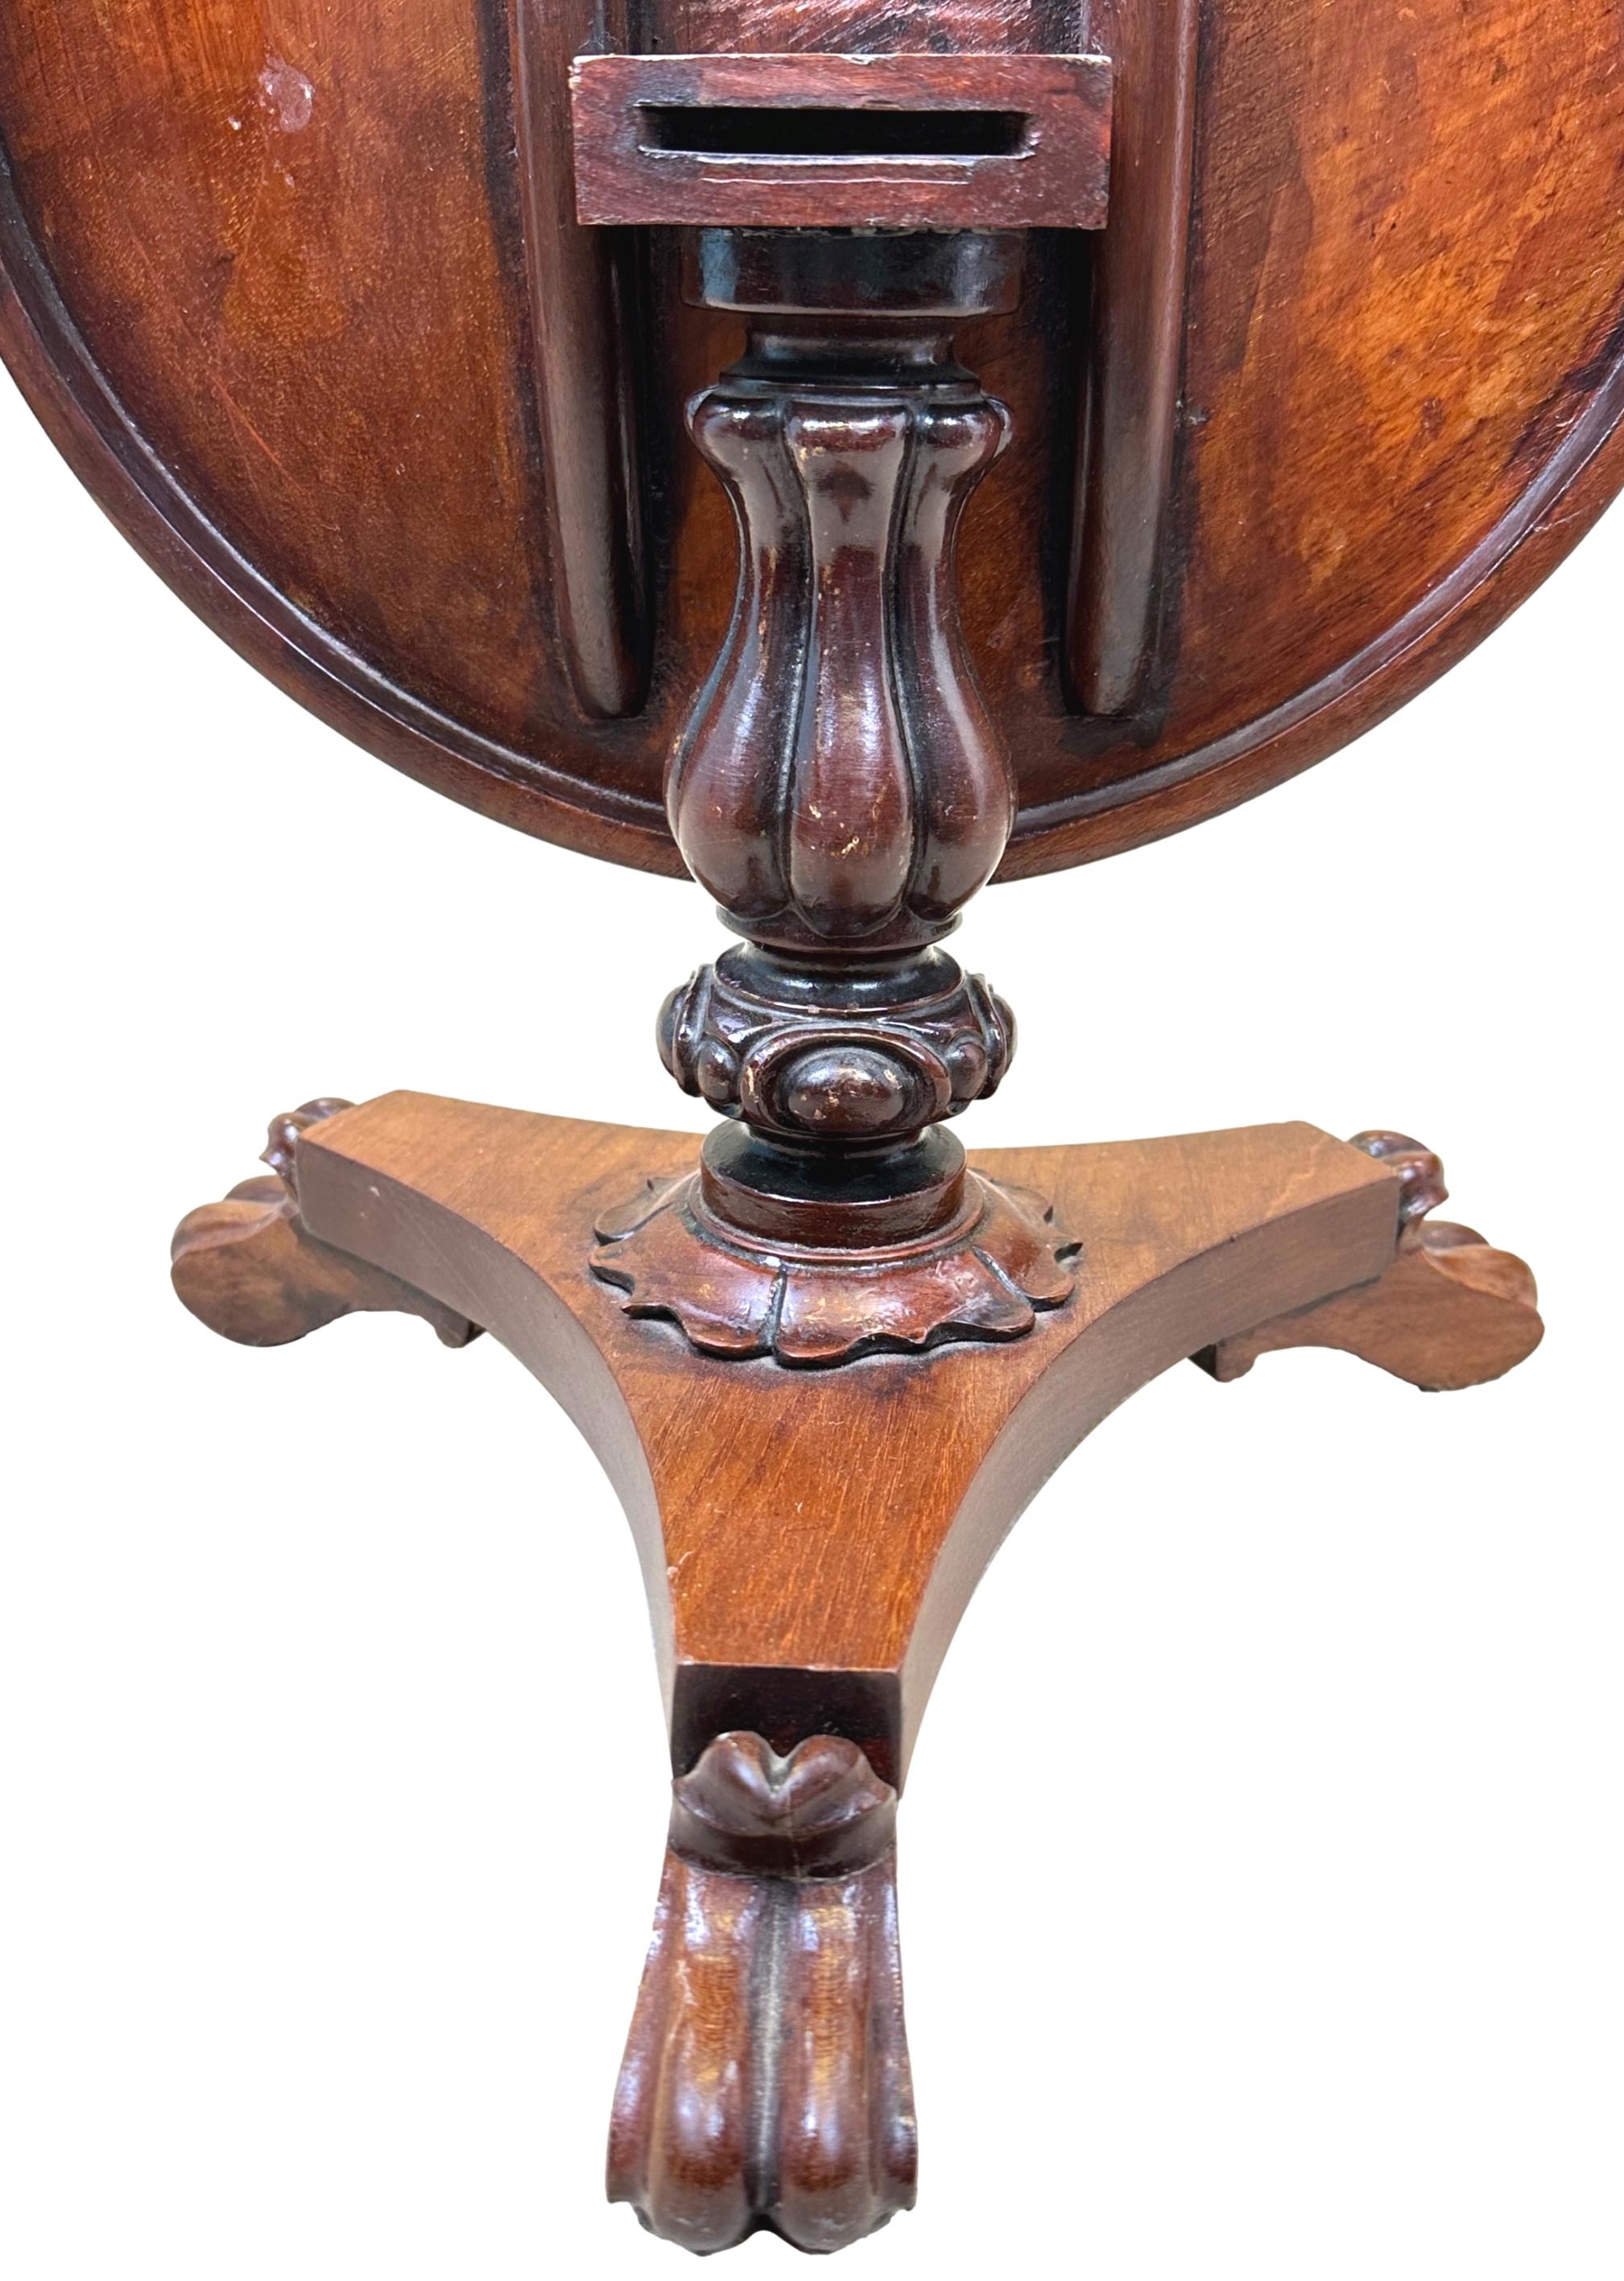 An exceptional quality mid-19th century mahogany miniature center table, having superbly figured circular tilting top, over elegant carved central column and triform plateau base, with carved scrolling feet.

There is often debate as to the